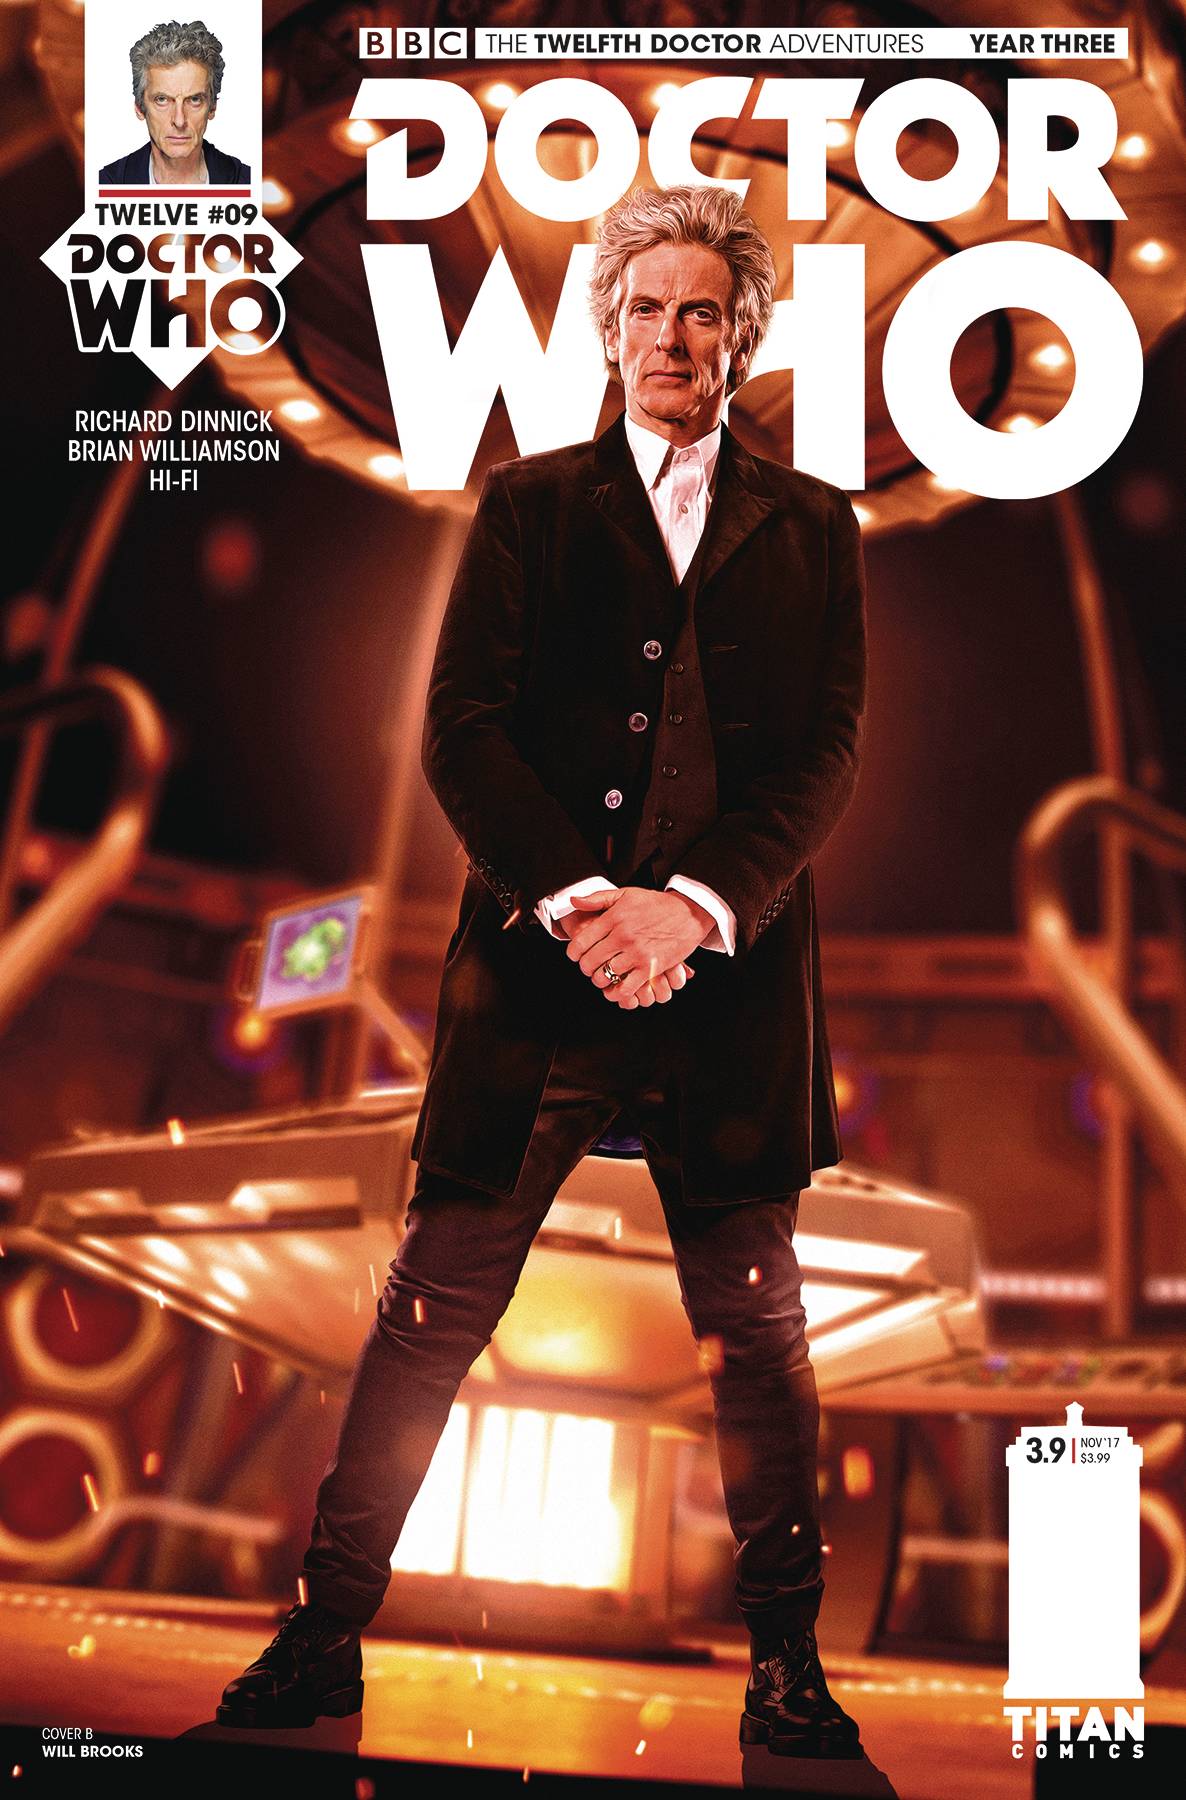 Doctor Who 12th Year Three #9 Cover B Photo